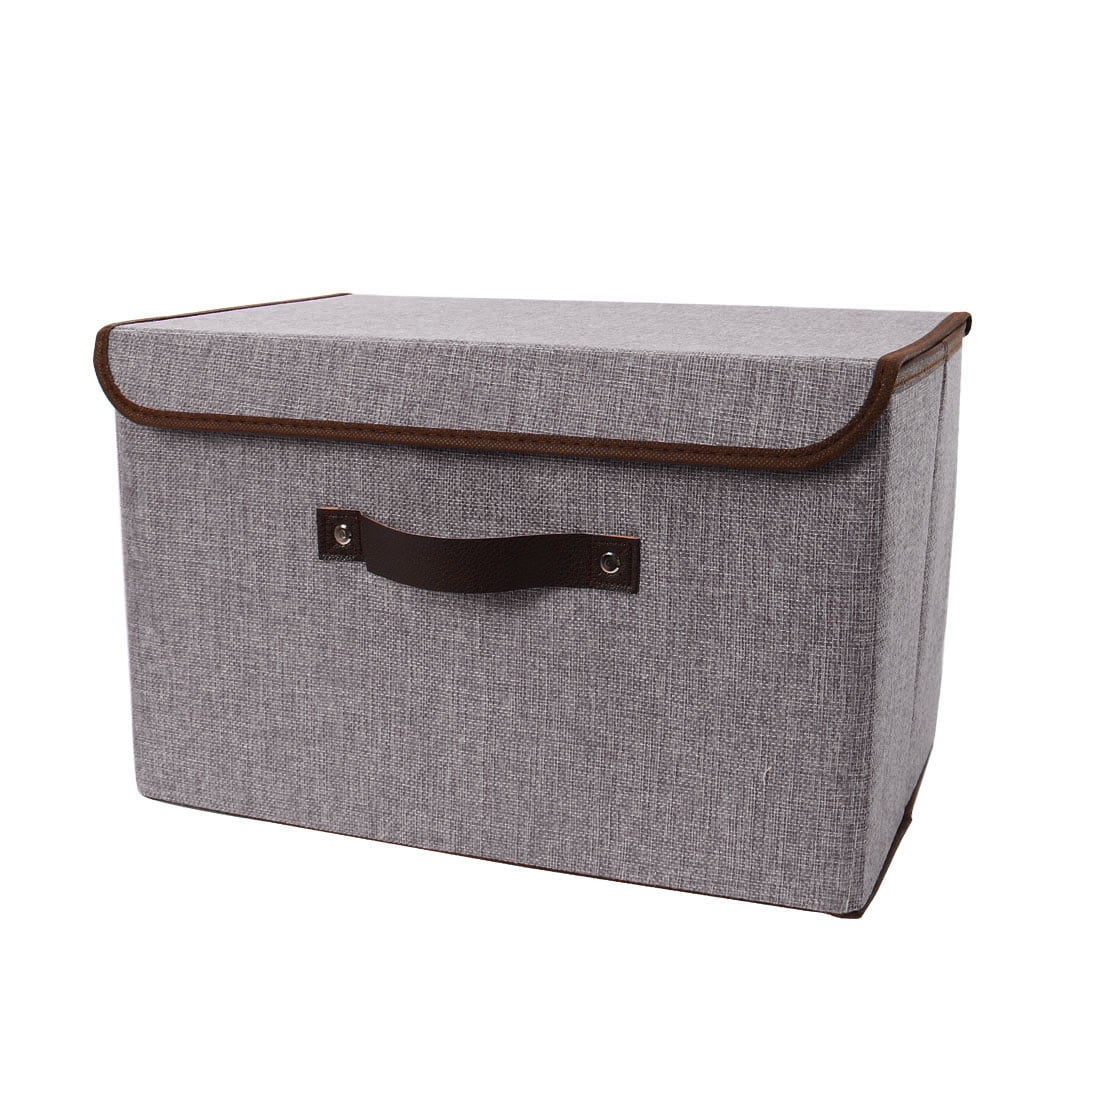 Bedroom Fabric Foldable Storage Cube Box,Closet Organizer,Nursery Hamper Basket with Handle for Home Living Room,Grey,2 Packs Playing Room Entryway Zonyon Storage Bin with Lid Office 